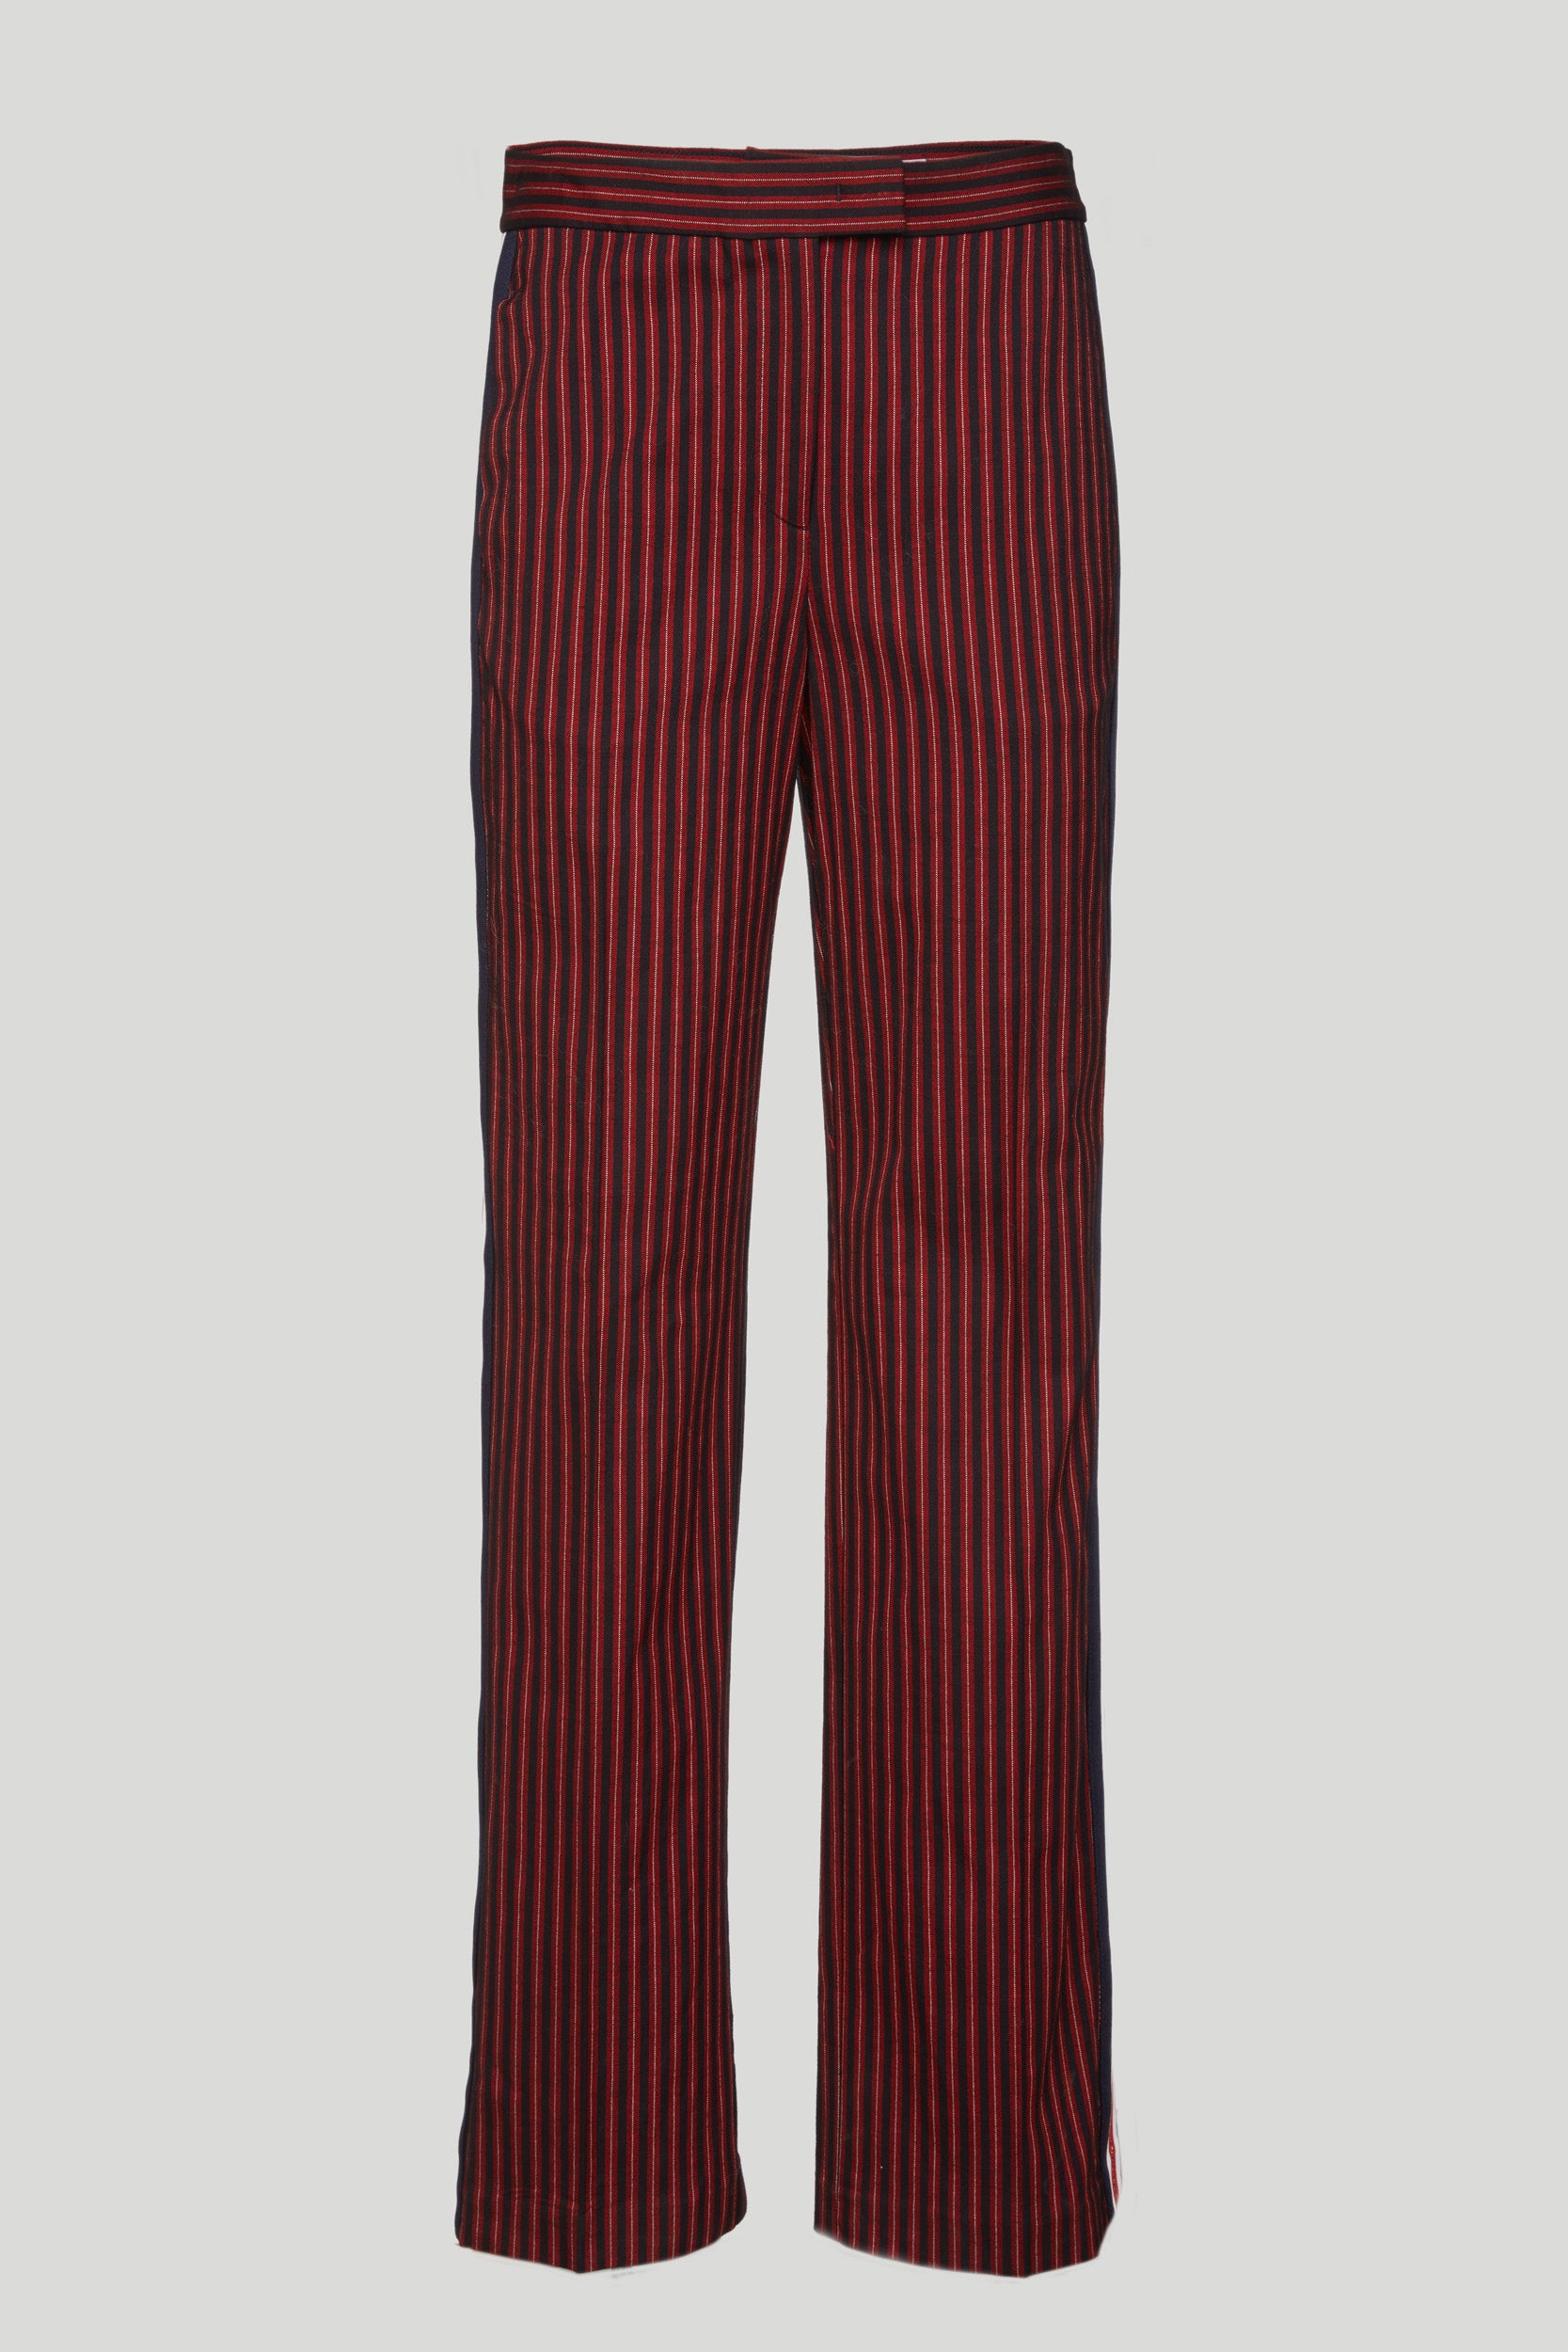 Pinstripe trousers with red stripe